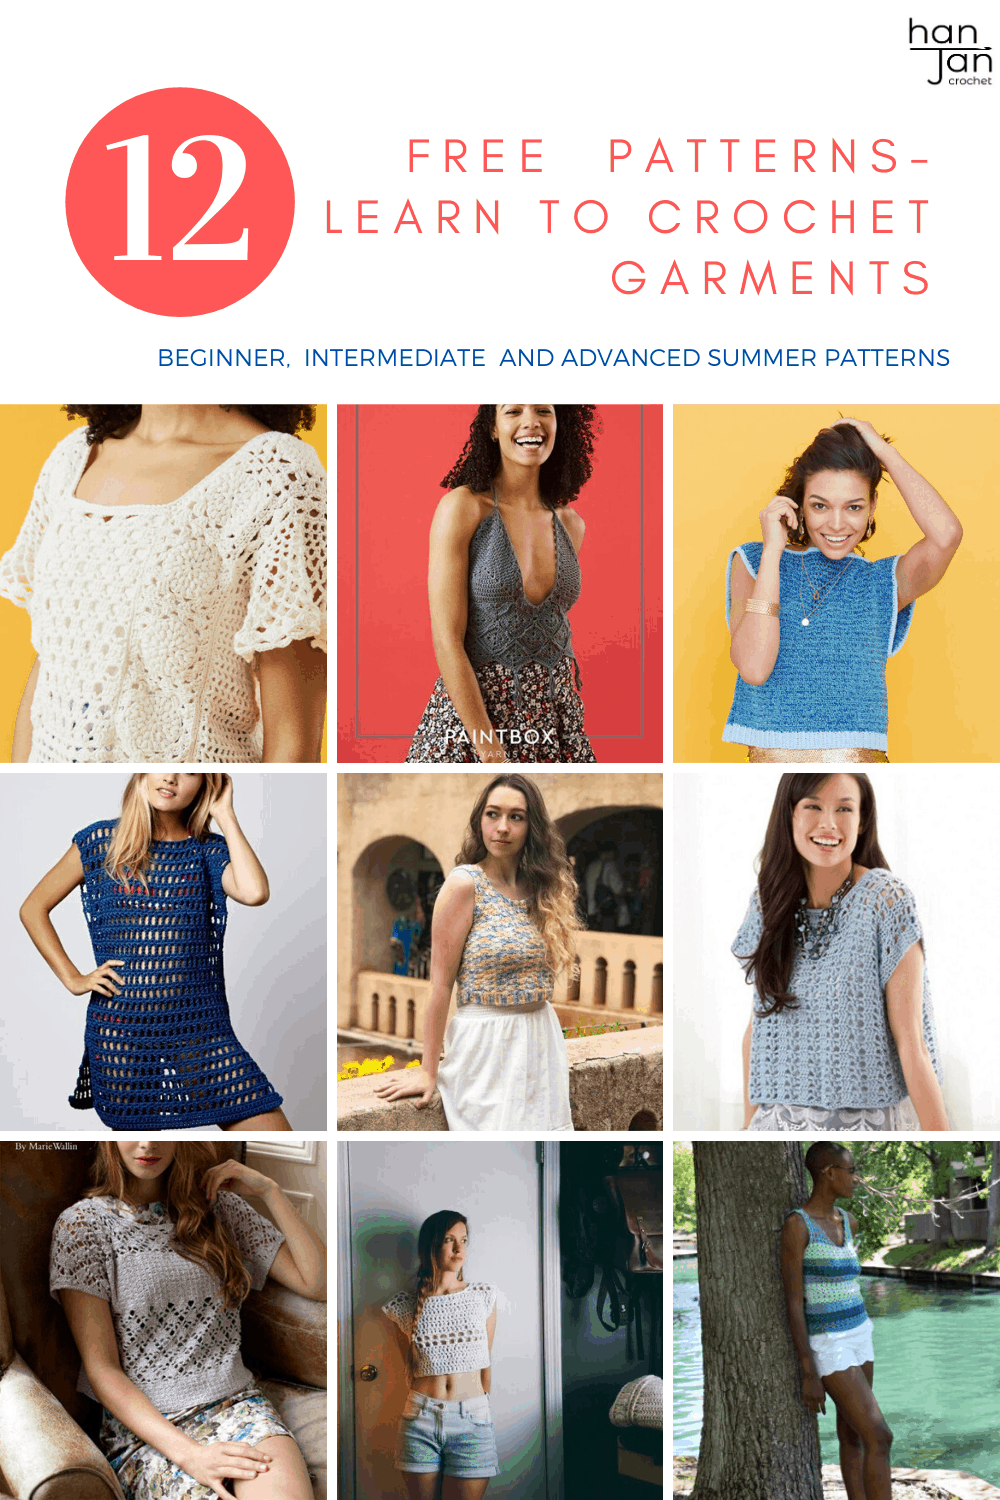 Learn garment making with 12 free crochet summer top patterns and top tips for success with crochet garments.